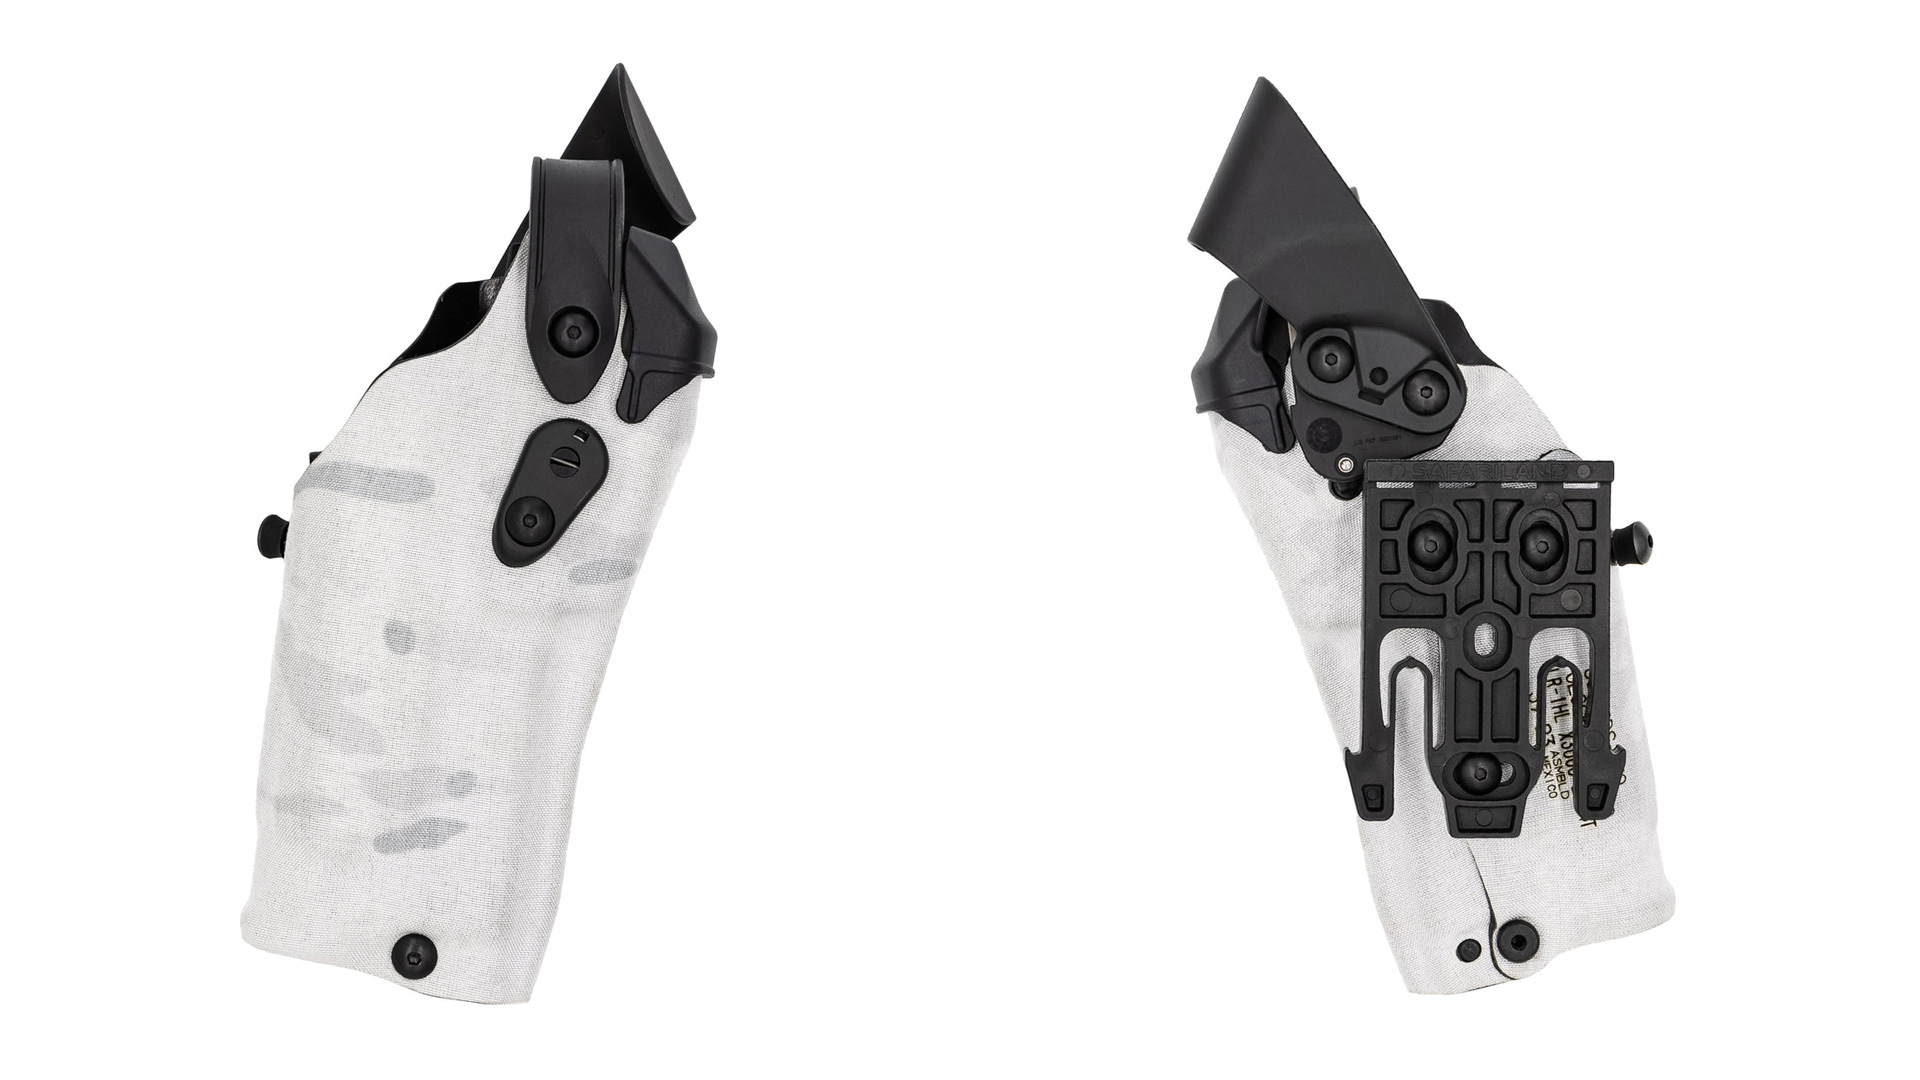 Buy Quick Locking System Holsters - Order Online our QLS Holsters